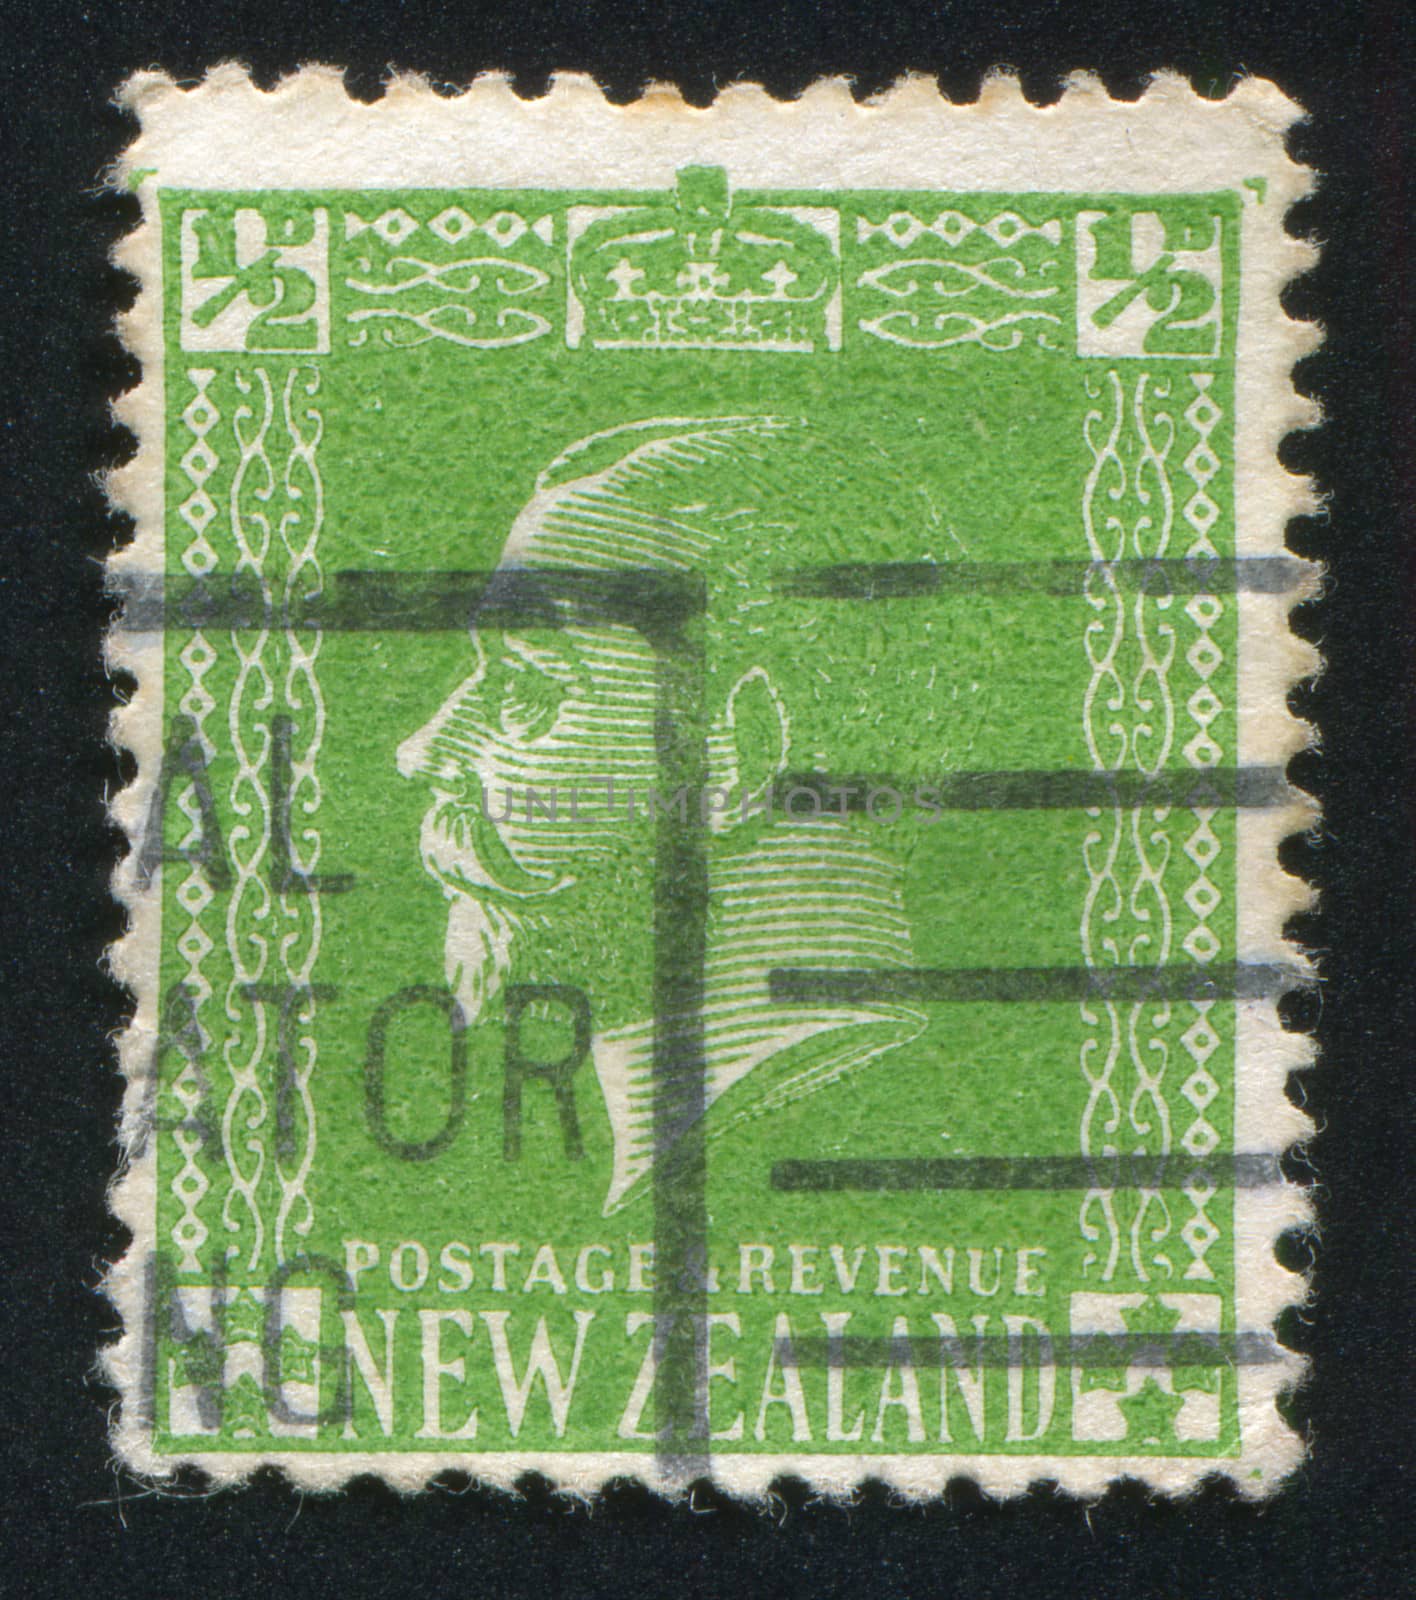 NEW ZEALAND - CIRCA 1915: stamp printed by New Zealand, shows King George V, circa 1915